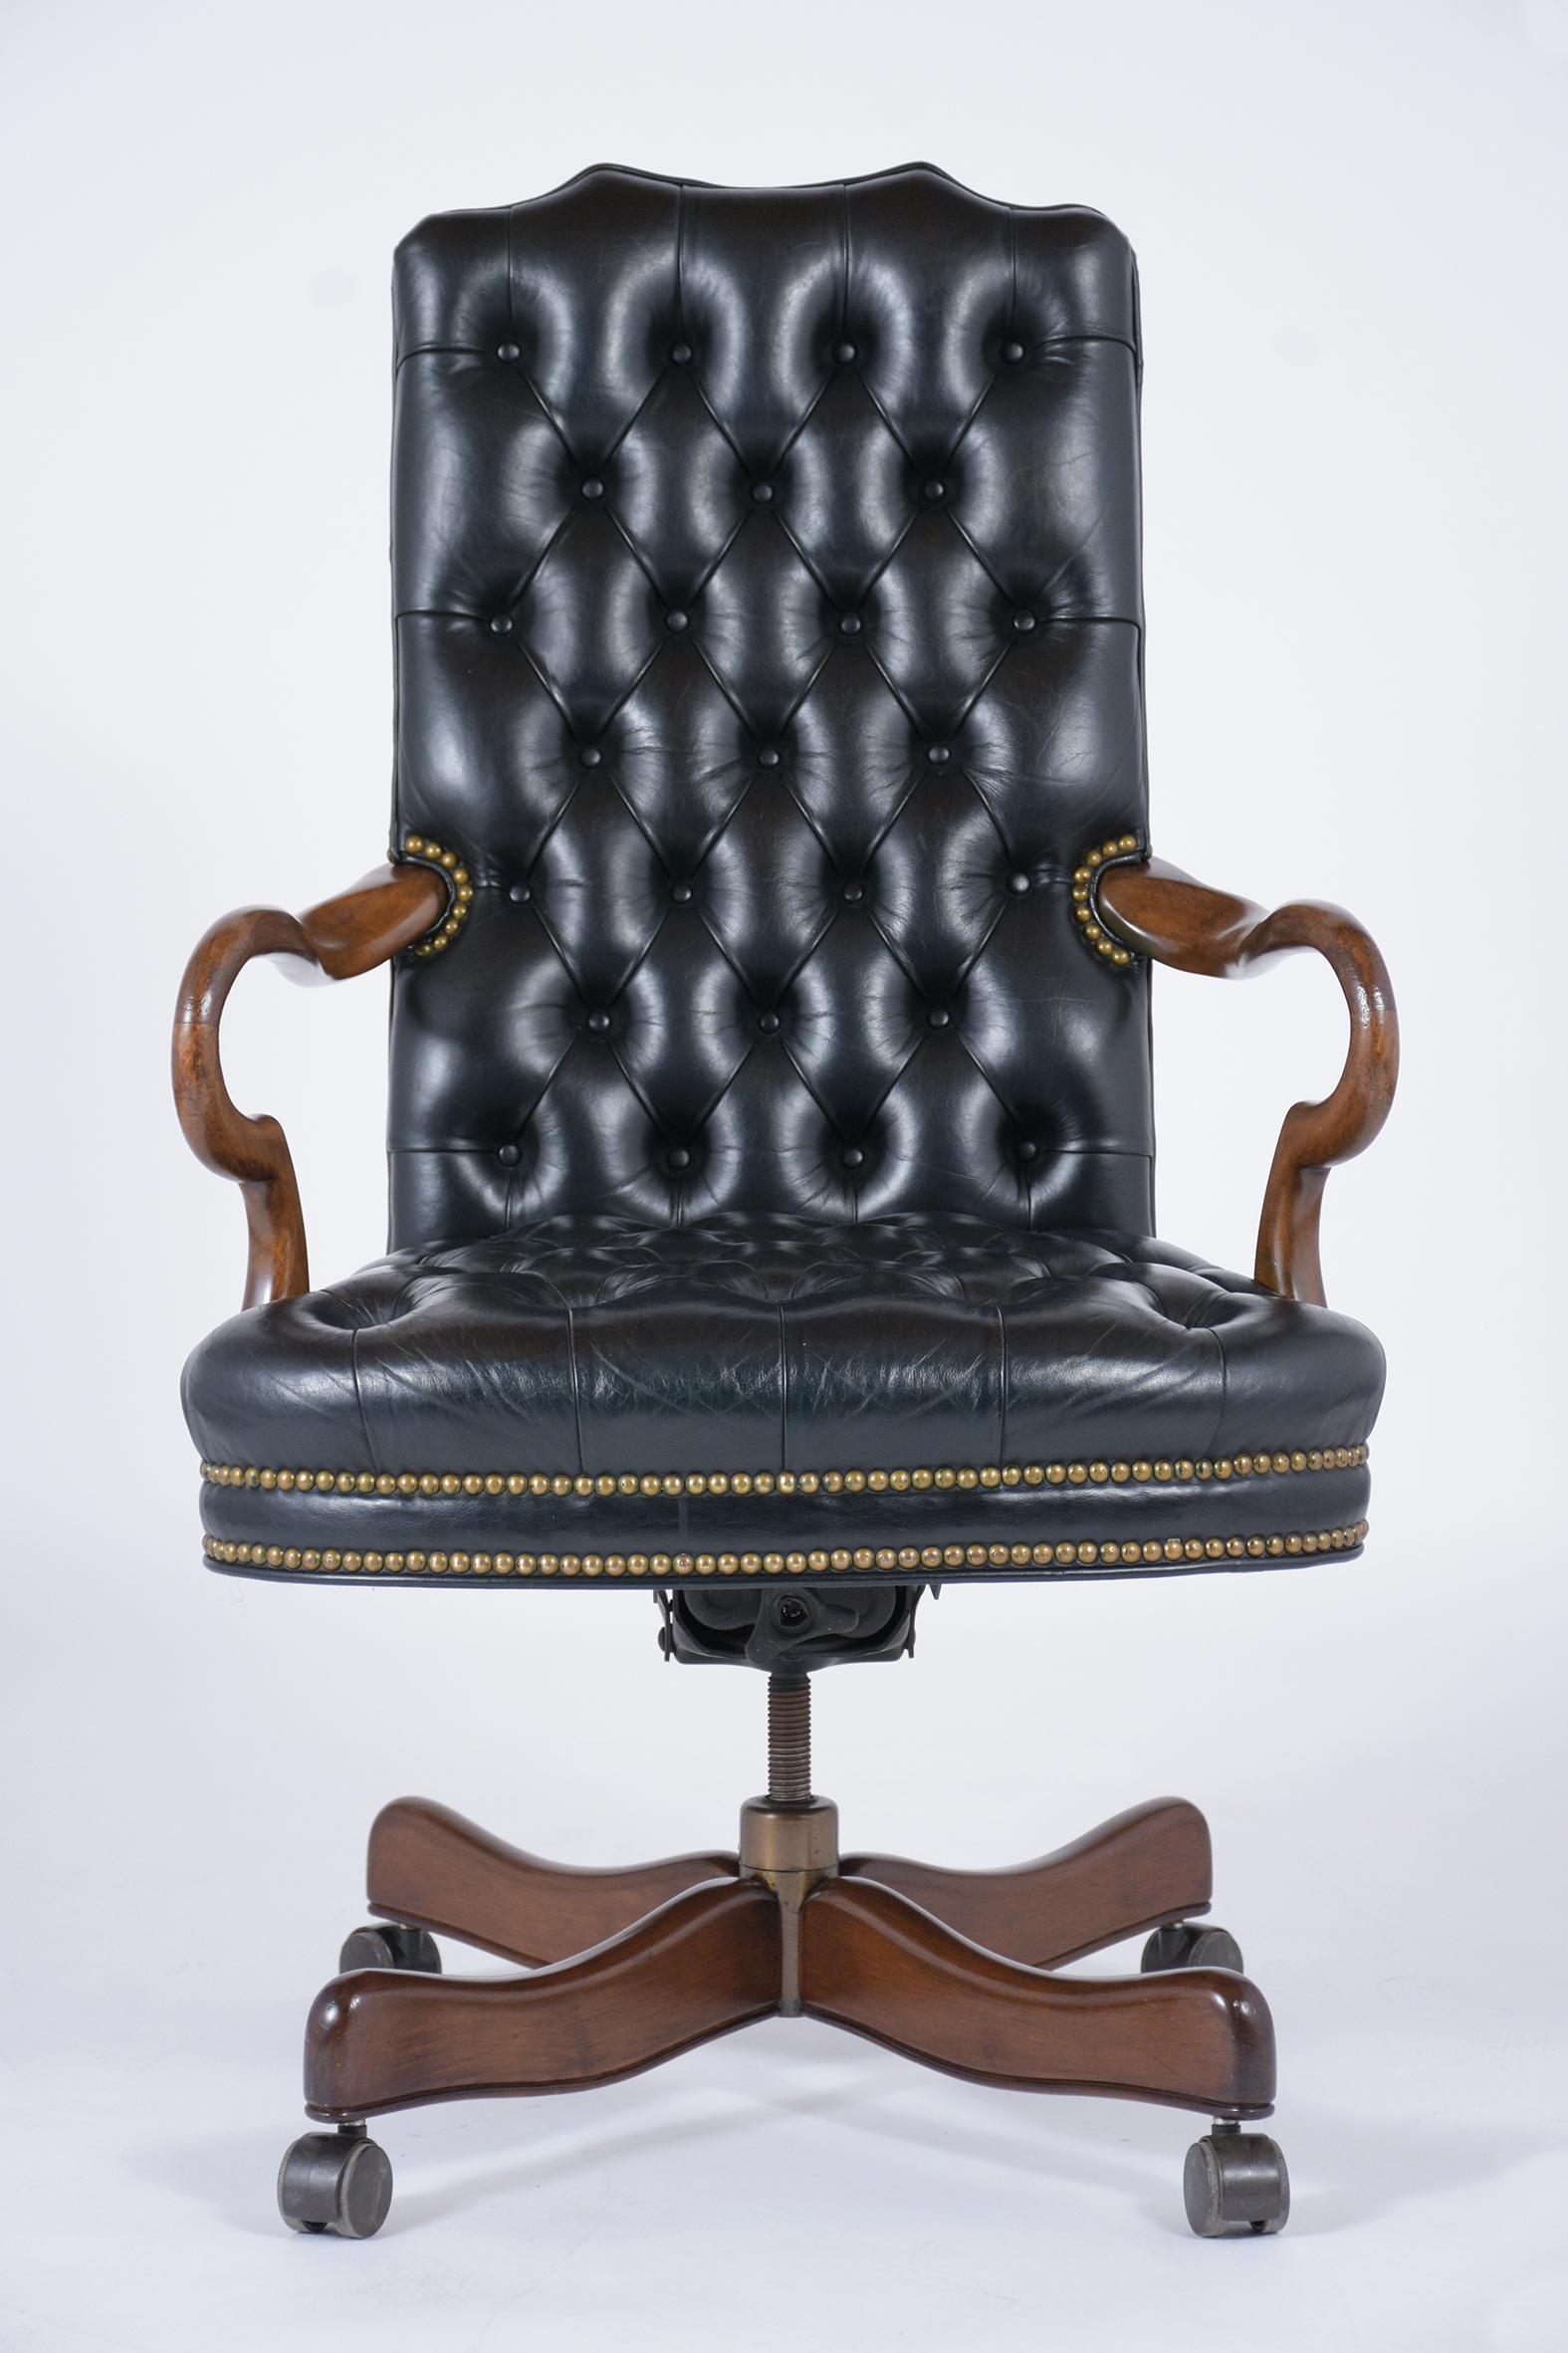 A 1980s Chesterfield style office chair crafted maple wood finished in a walnut color with a newly lacquered finish and is completely restored. The reclining chair is upholstered in its original tufted leather and has been professionally dyed a new